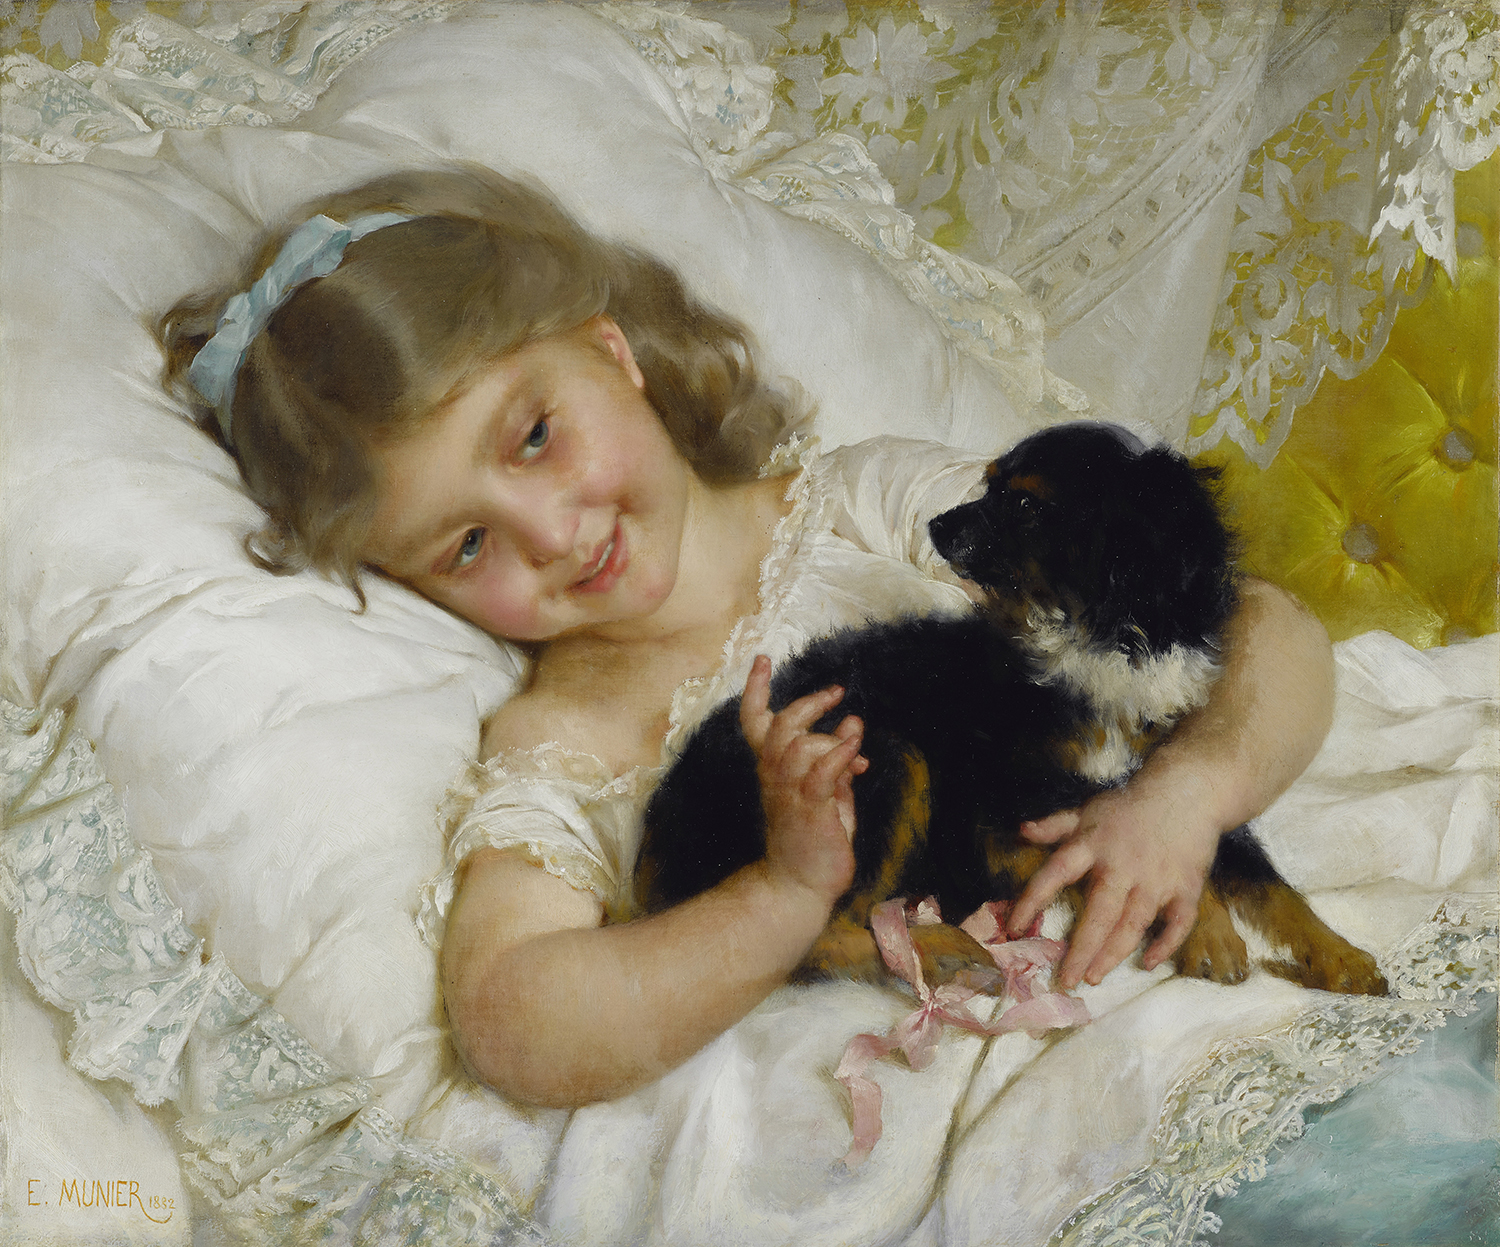 Young girl in bed with a black dog